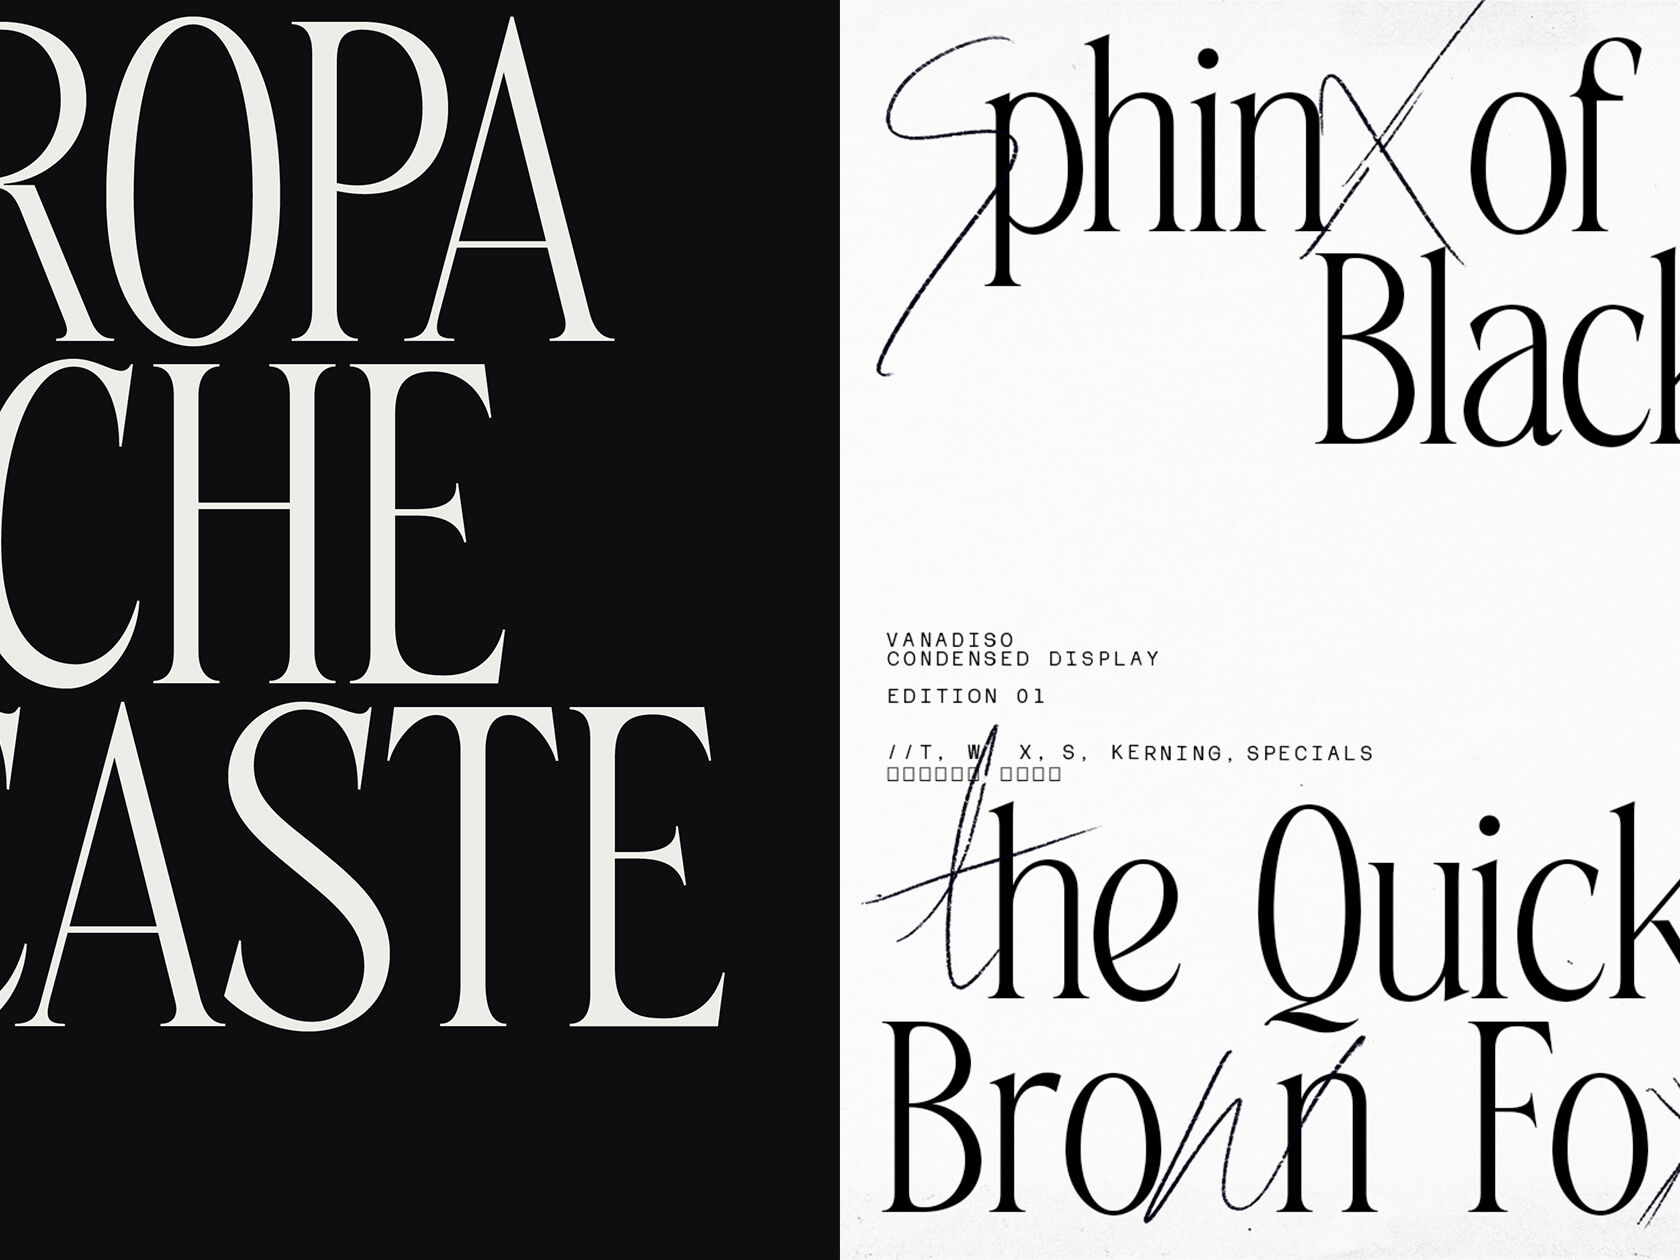 Victoria Englund and Wille Larsson on ‘Vanadiso’, a sharp, yet sophisticated display typeface